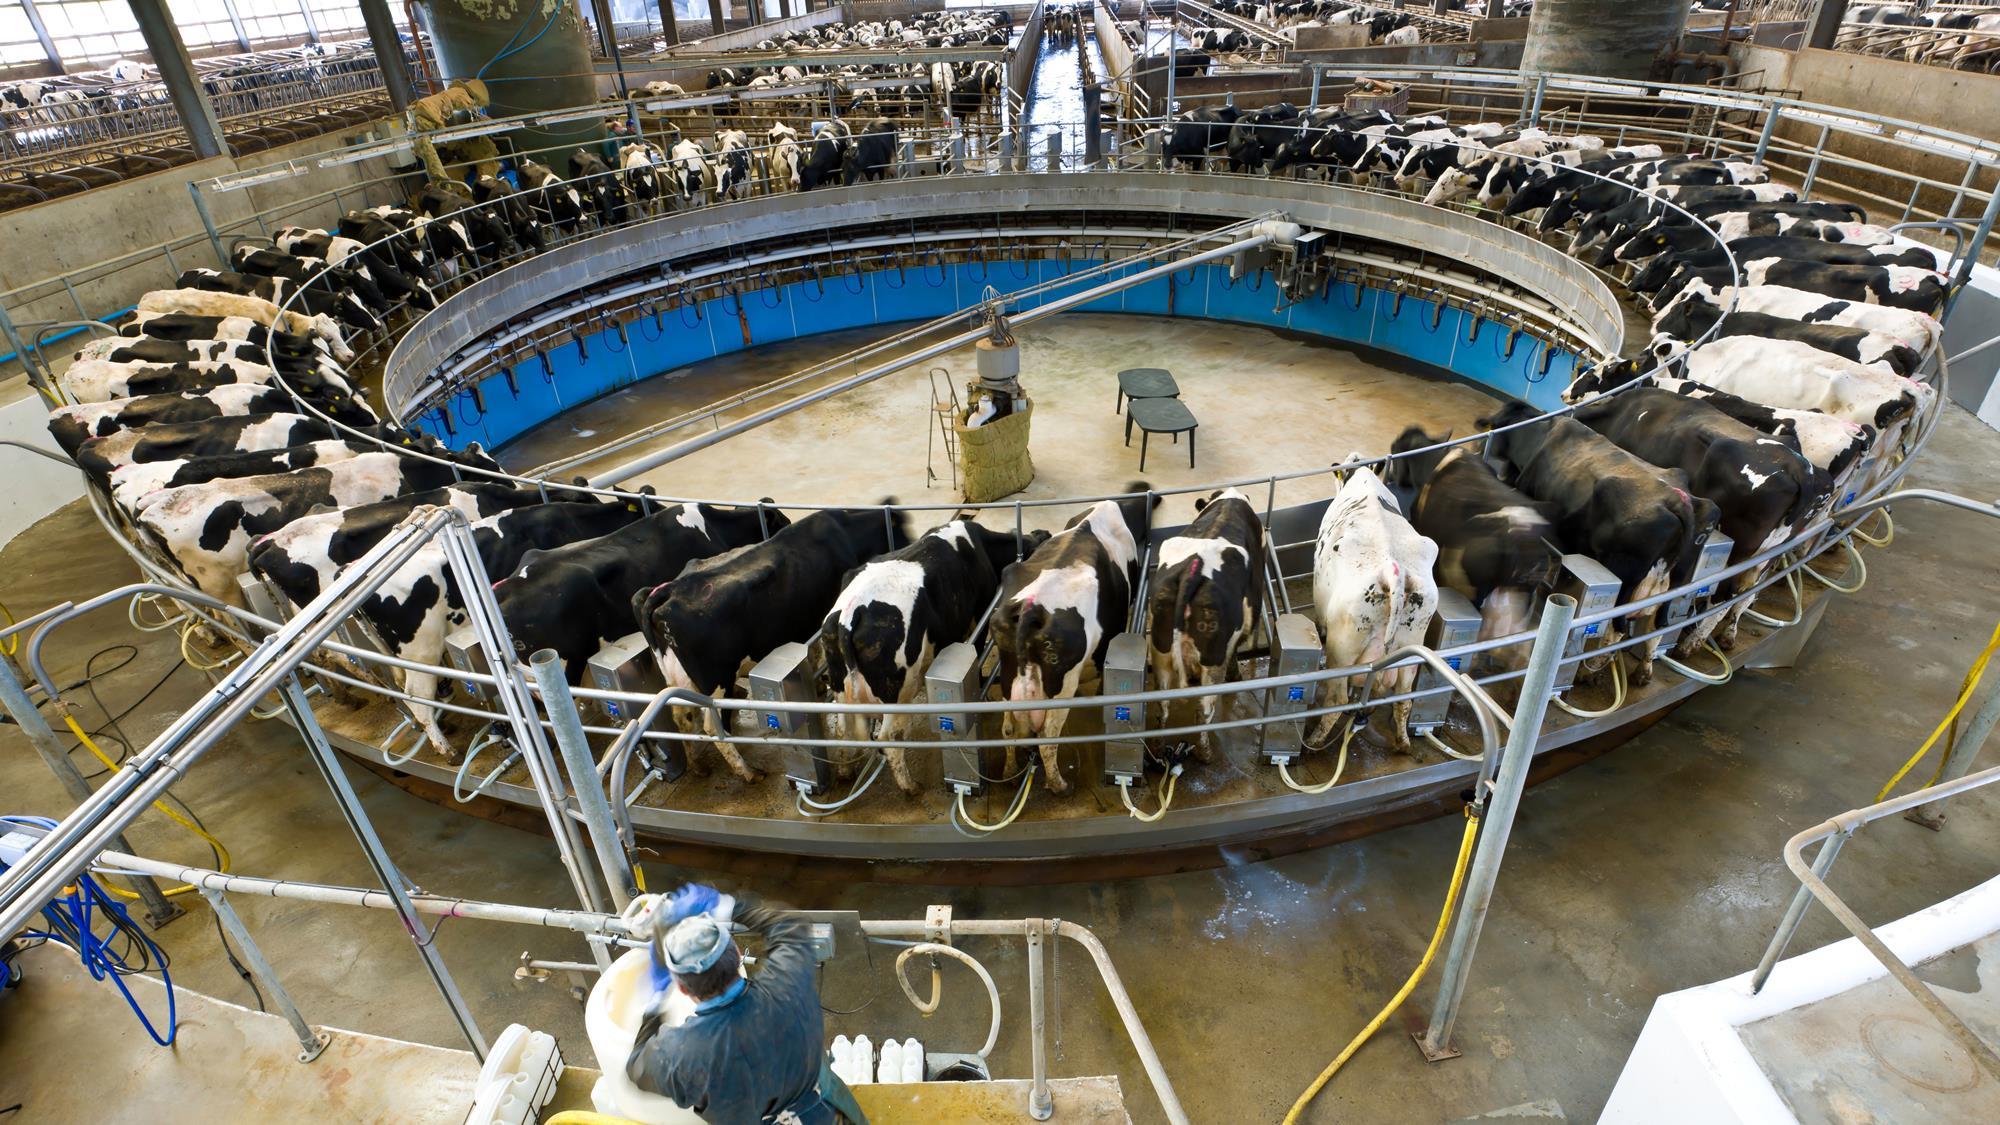 How disastrous is the coronavirus crisis for dairy farmers and ...